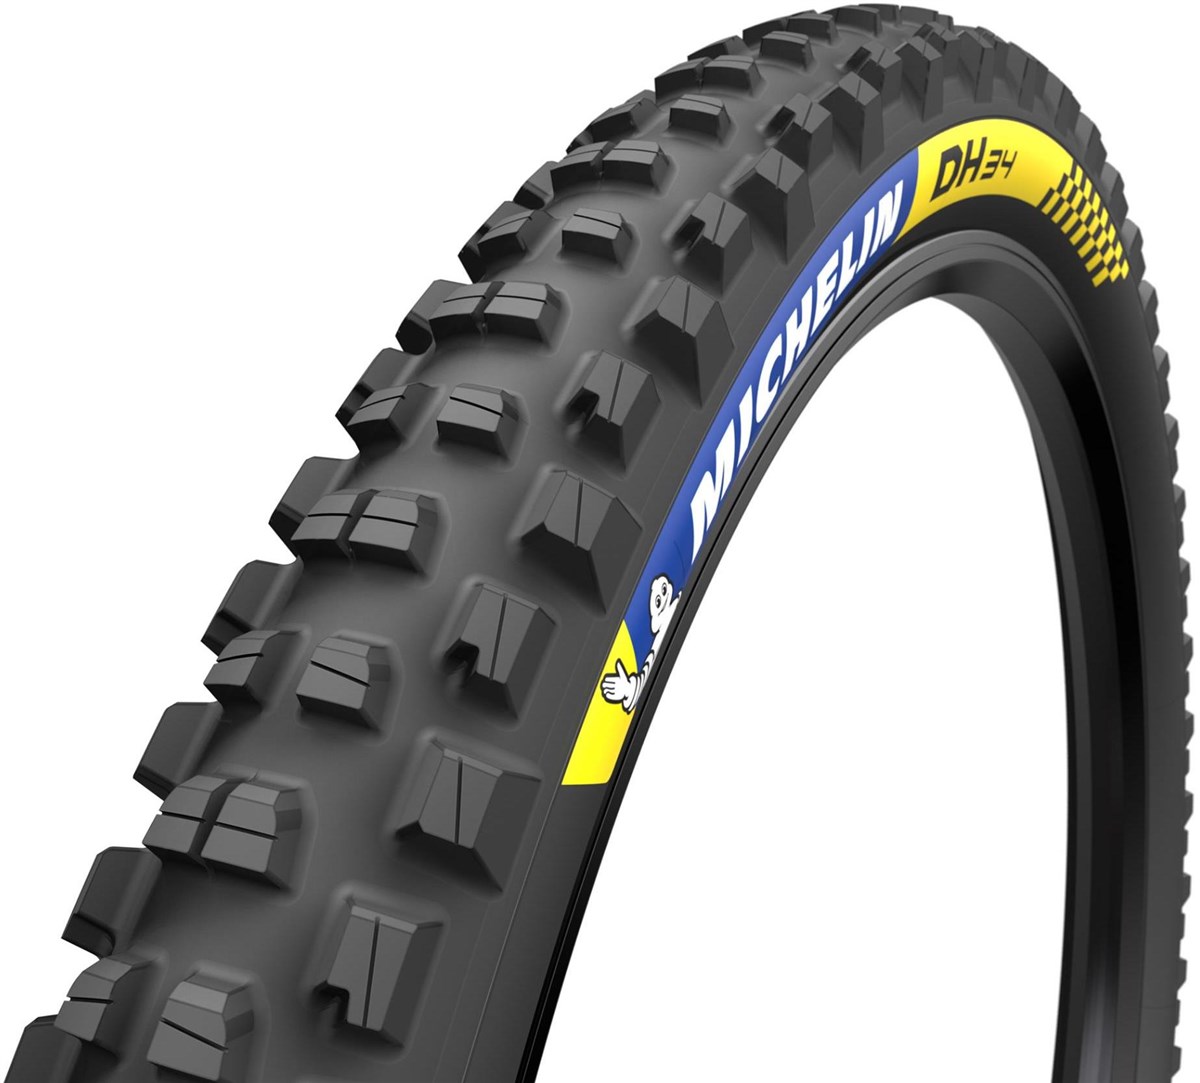 Michelin DH 34 27.5" Tyre product image